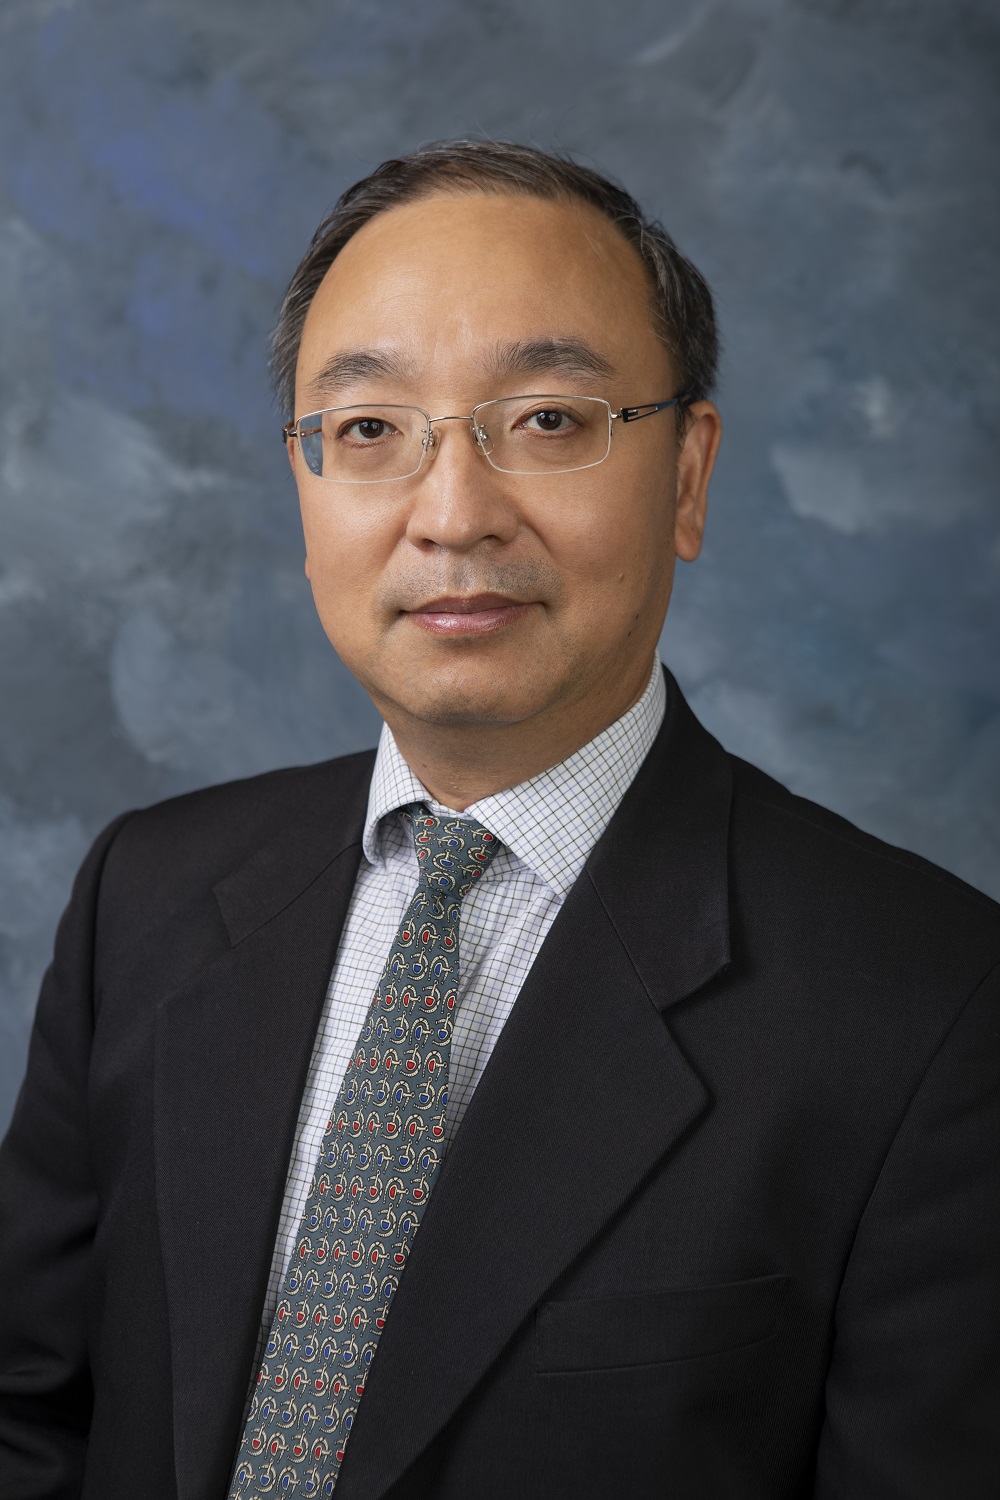 Dr. Hsiao